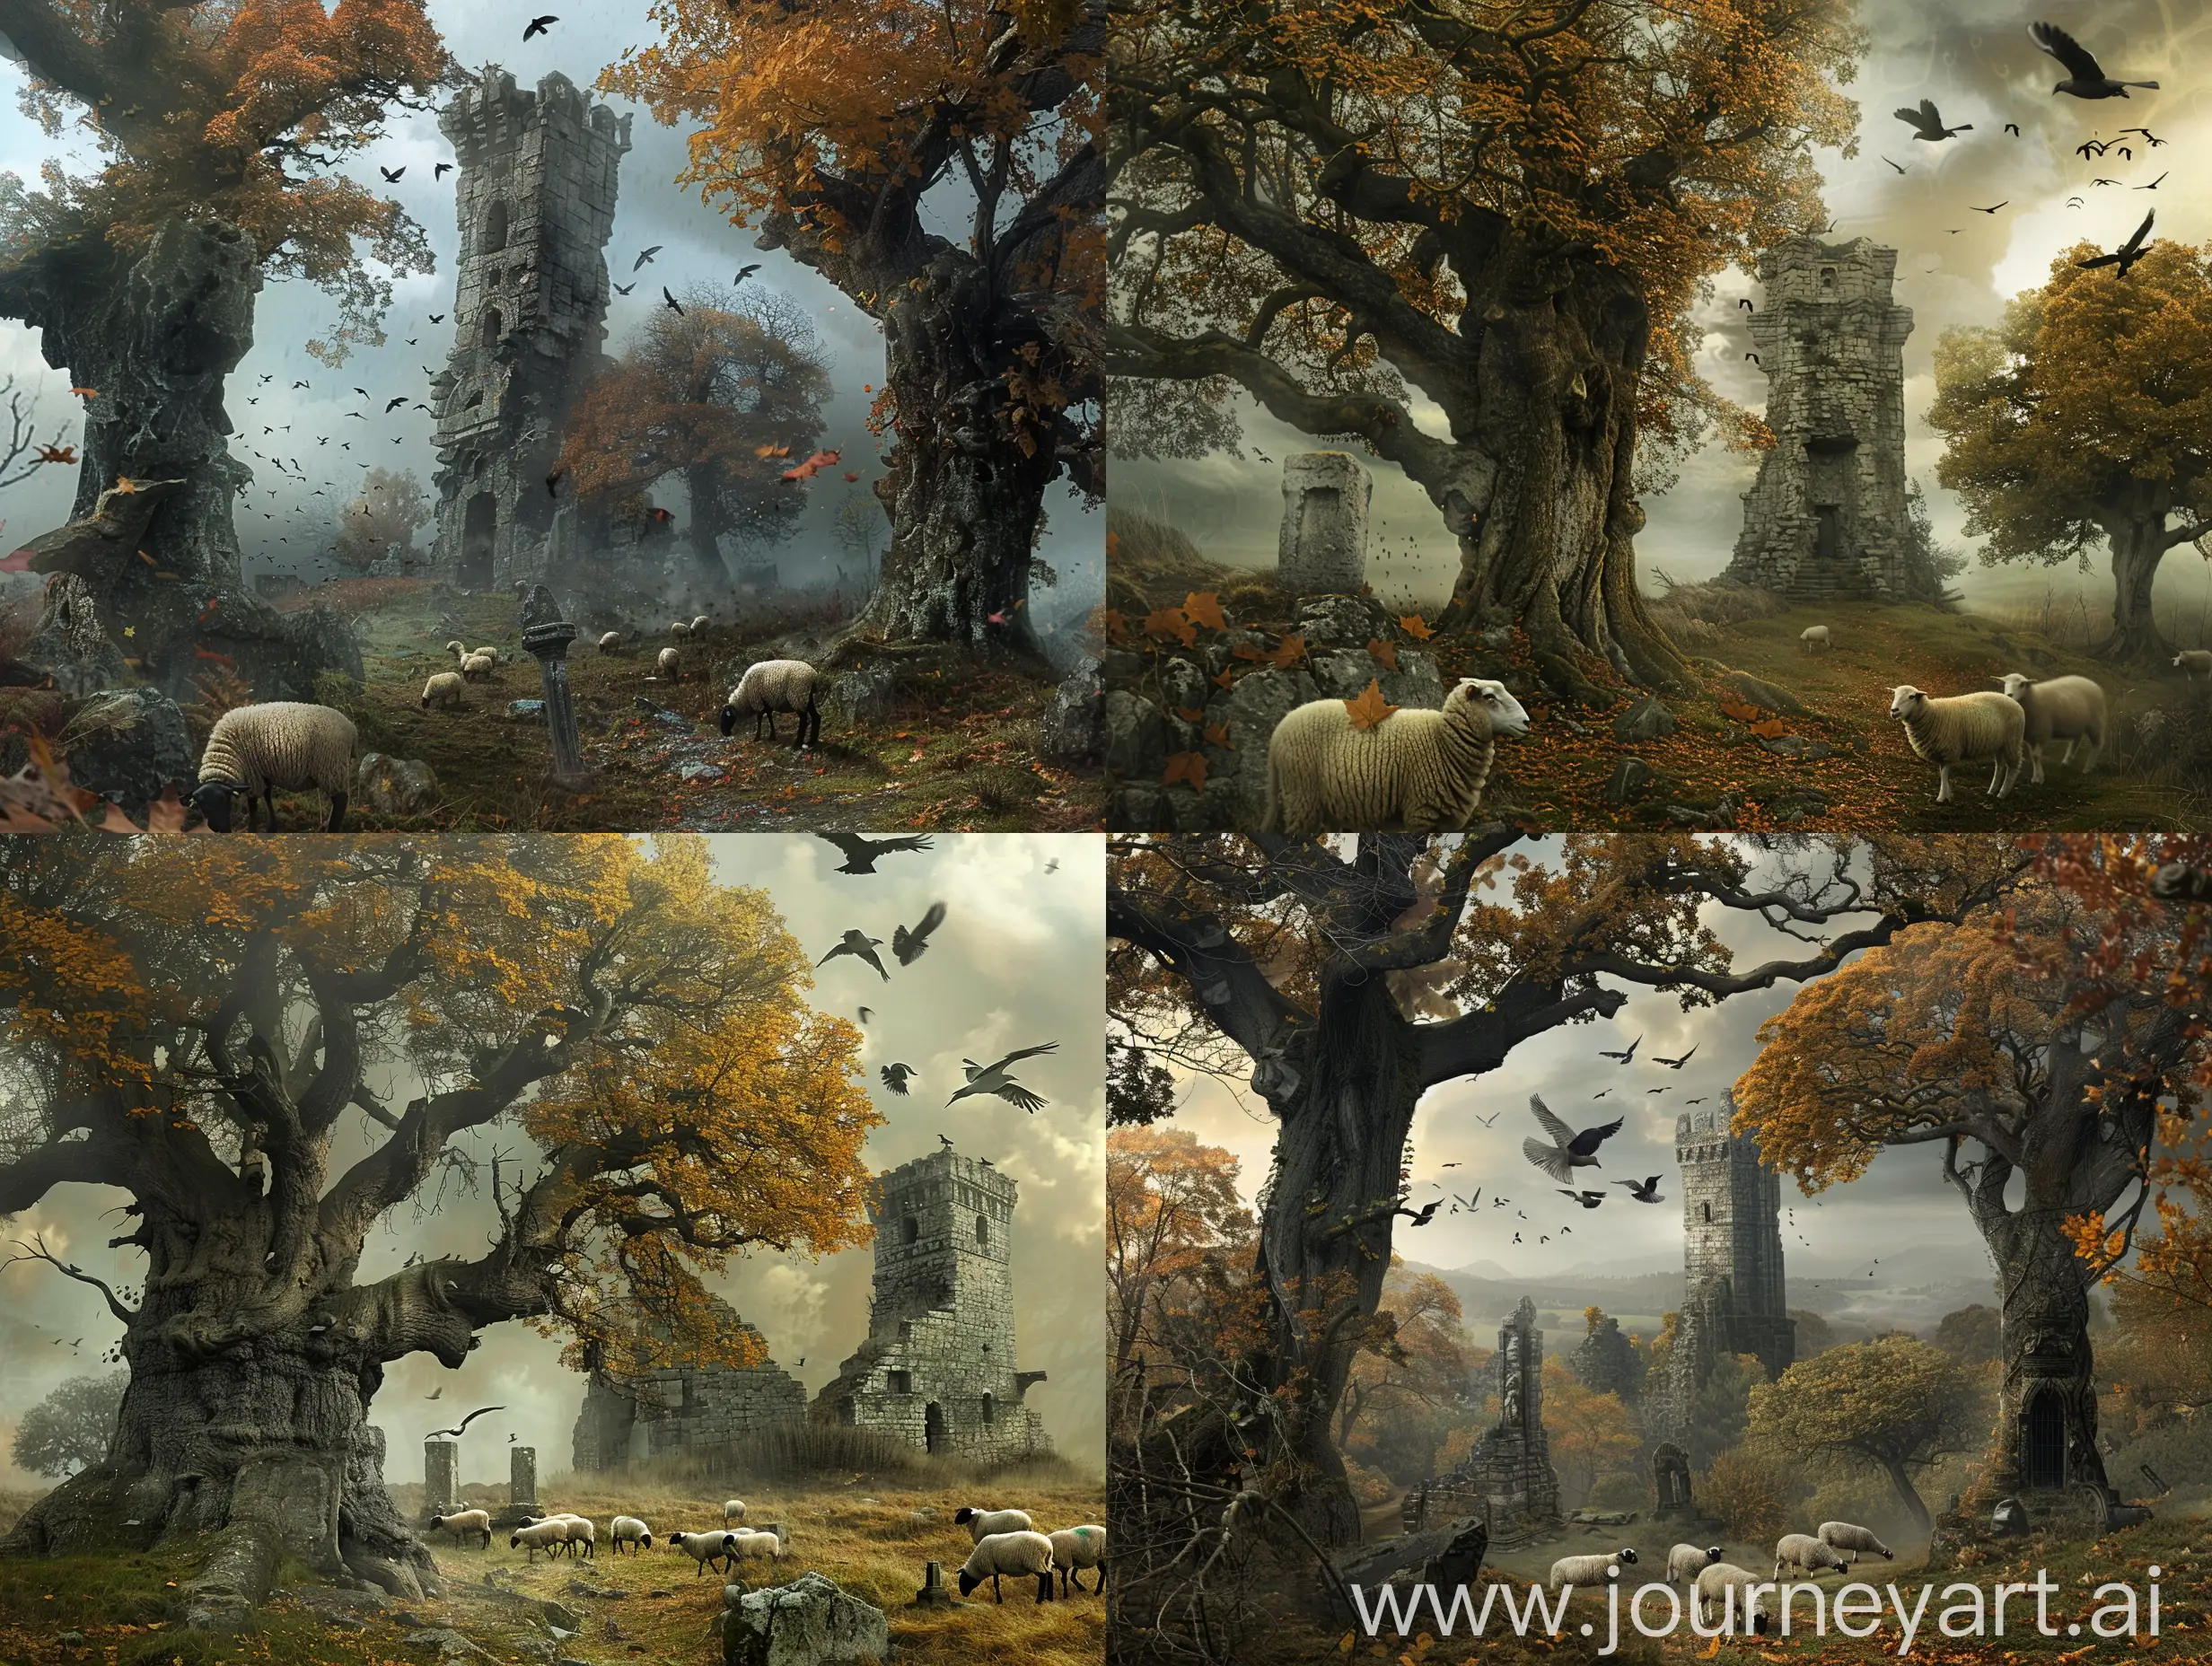  Autumn fantasy landscape, old trees, birds in the sky, moody, ruins of an ancient wizard tower in the distance, flock of sheep, magic stone shrine. 